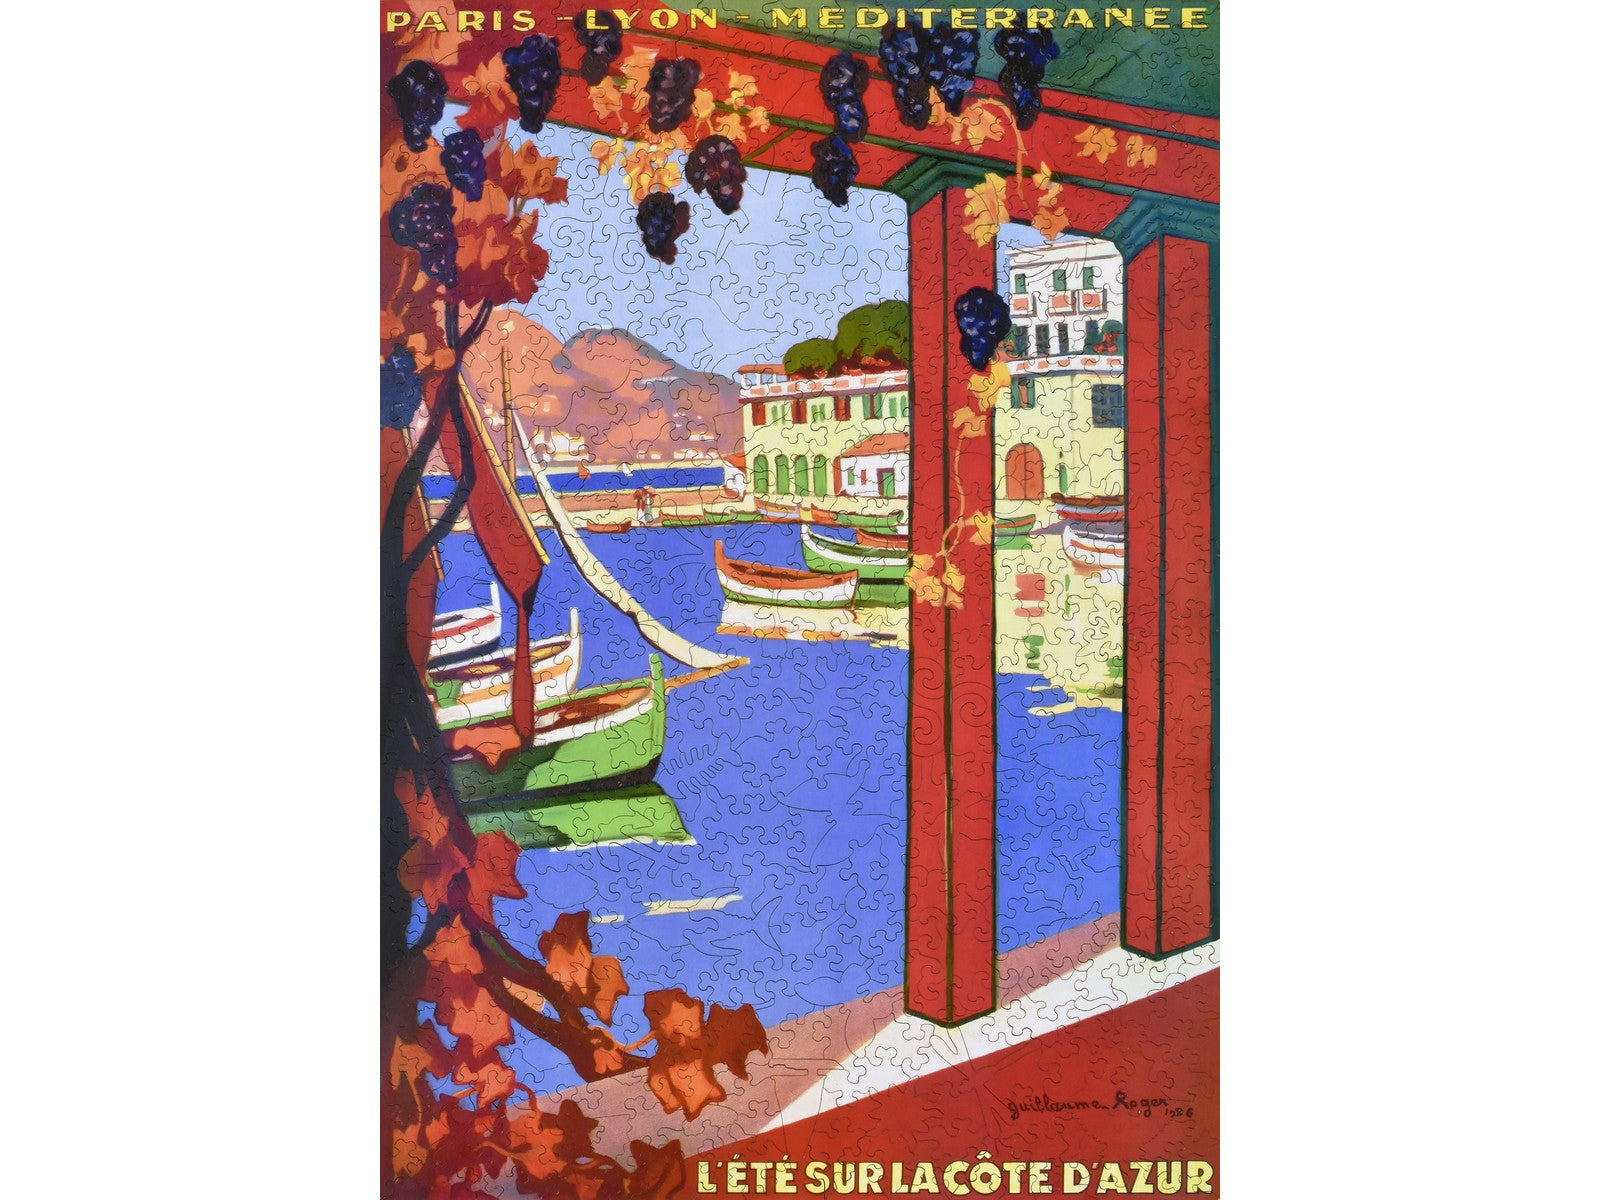 The front of the puzzle, Cote D'Azur, which shows a coastal harbor town.